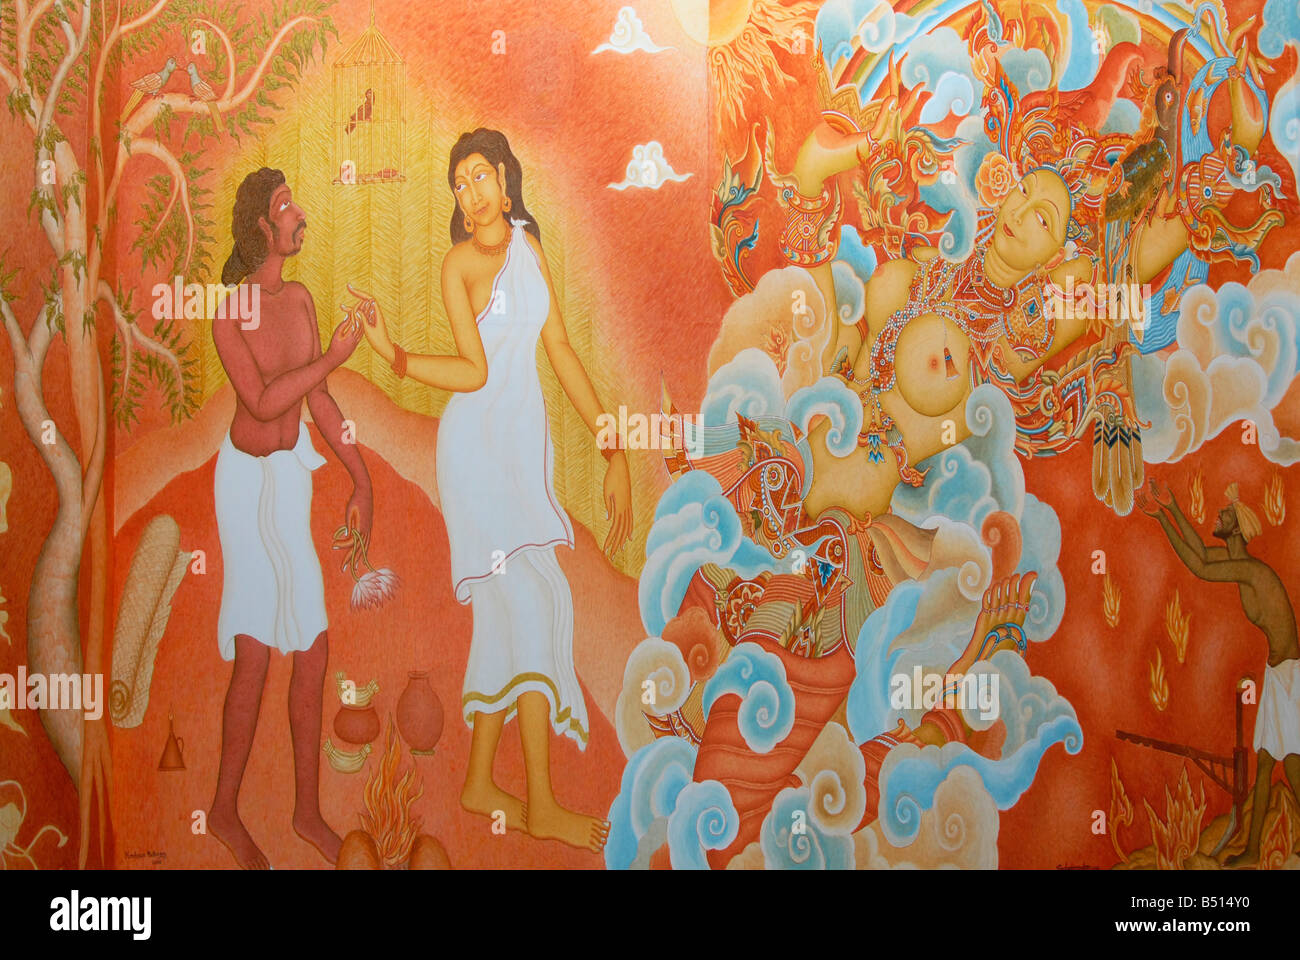 Indian Mural Painting Stock Photo